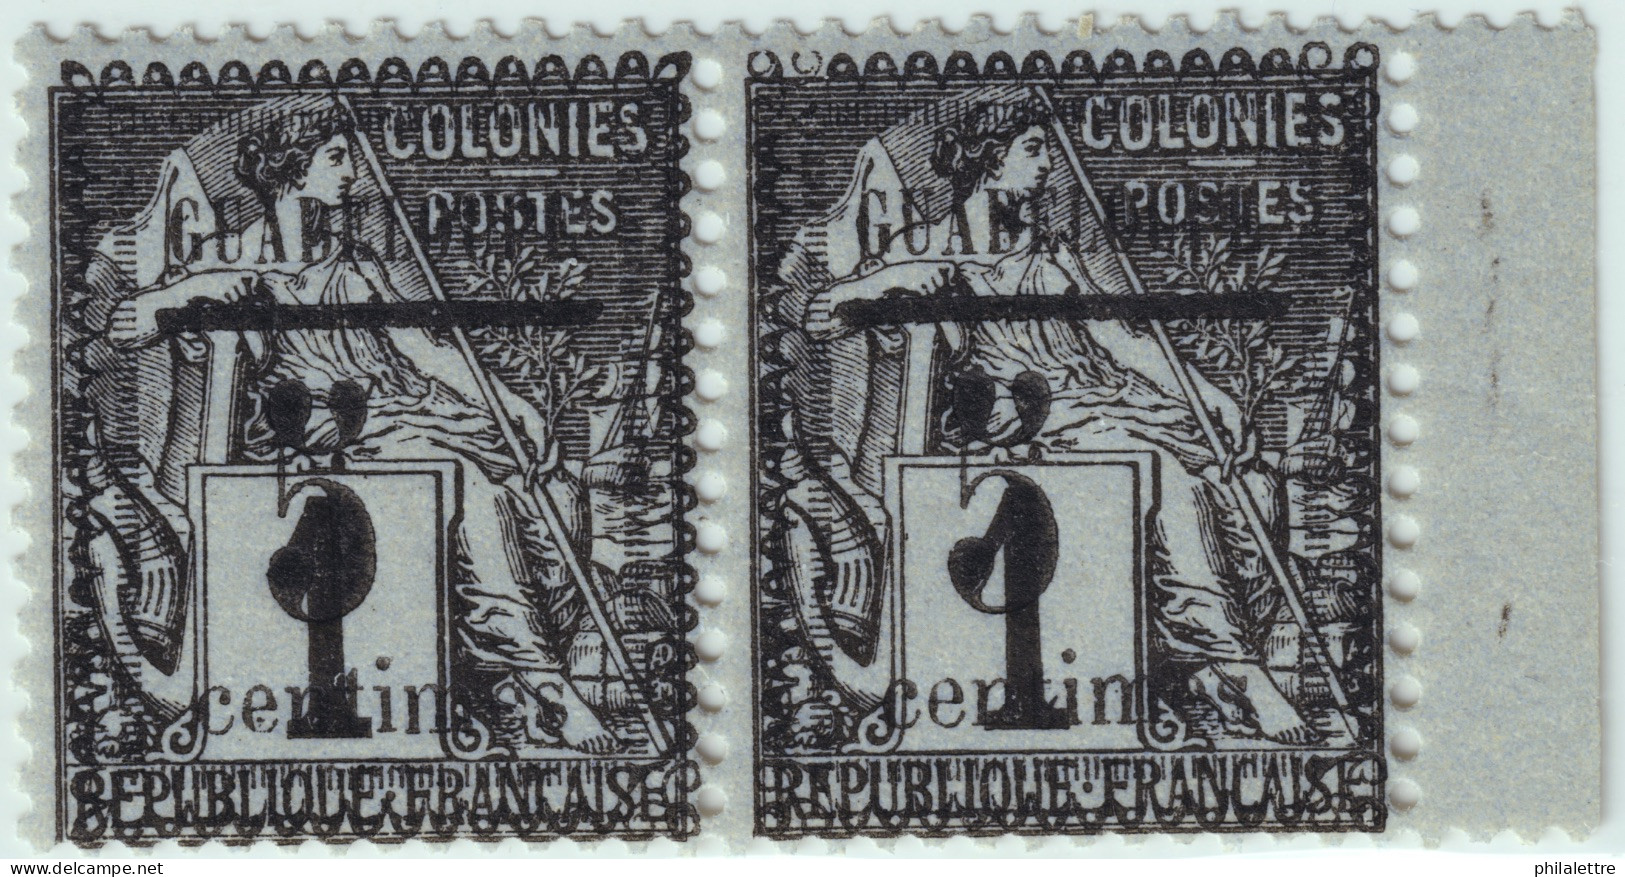 GUADELOUPE - 1889 - Yv.6 En Paire - Type I / Cadre Type IX & XI - Neufs ** - Unused Stamps